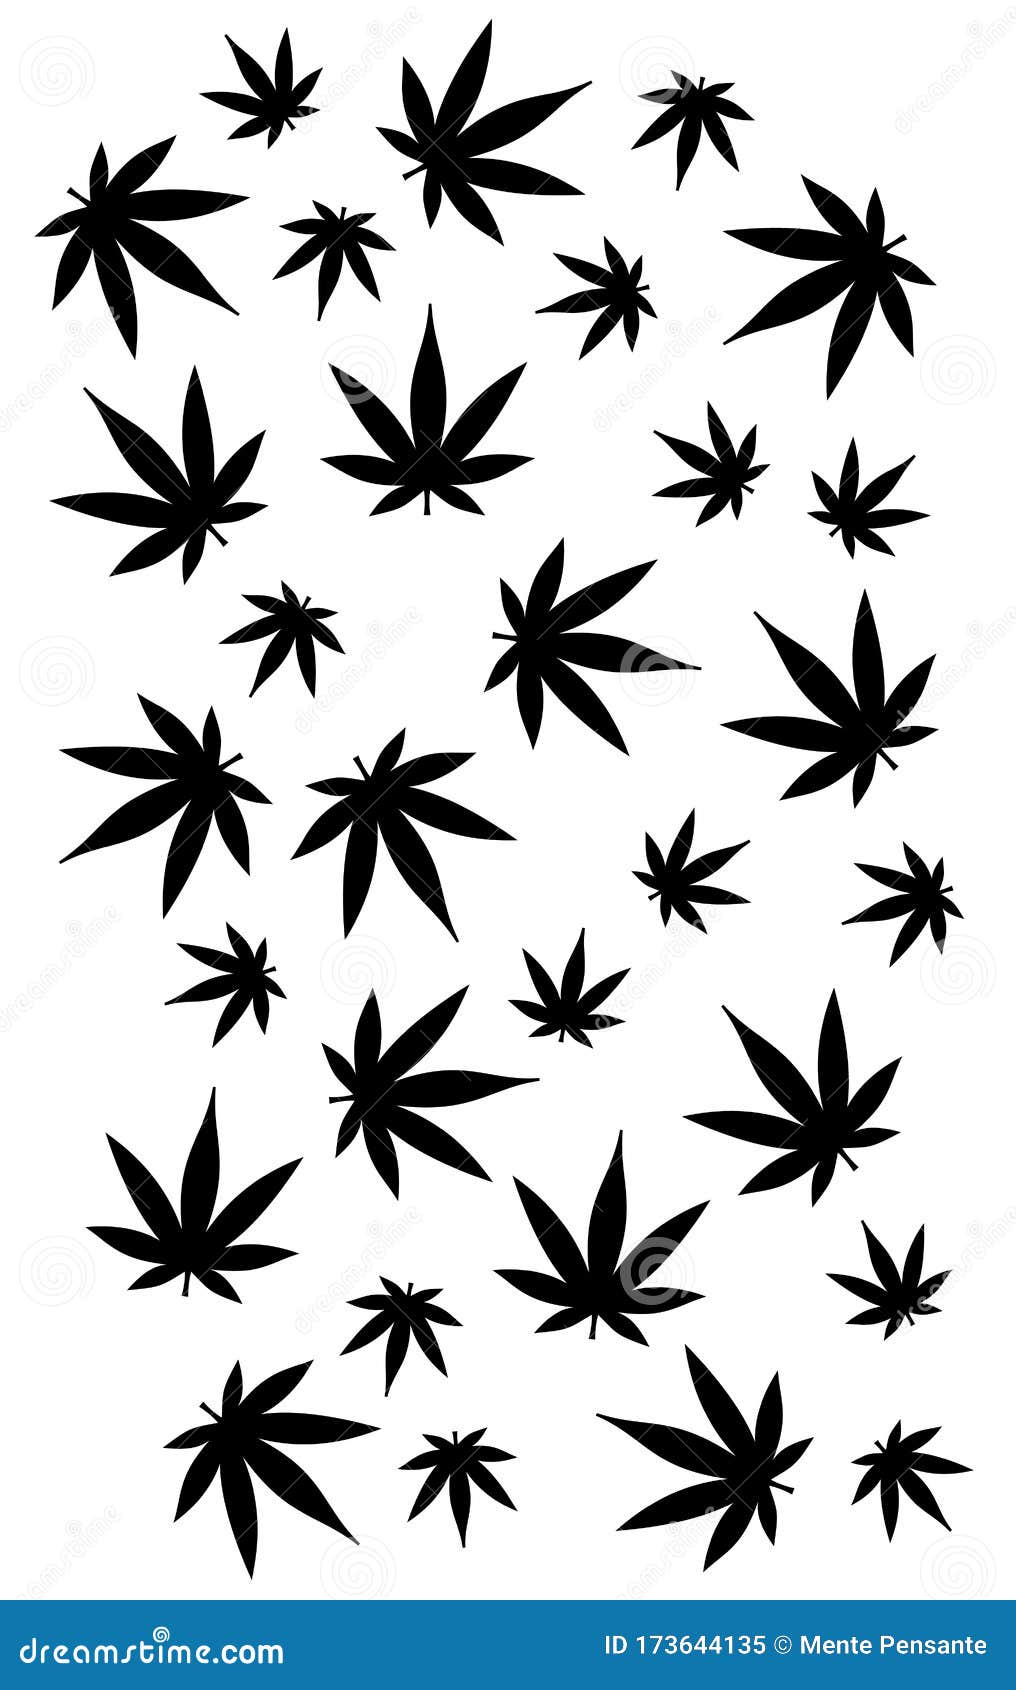 HD wallpaper Weed In Color green cannabis leaf Black and White plant  part  Wallpaper Flare